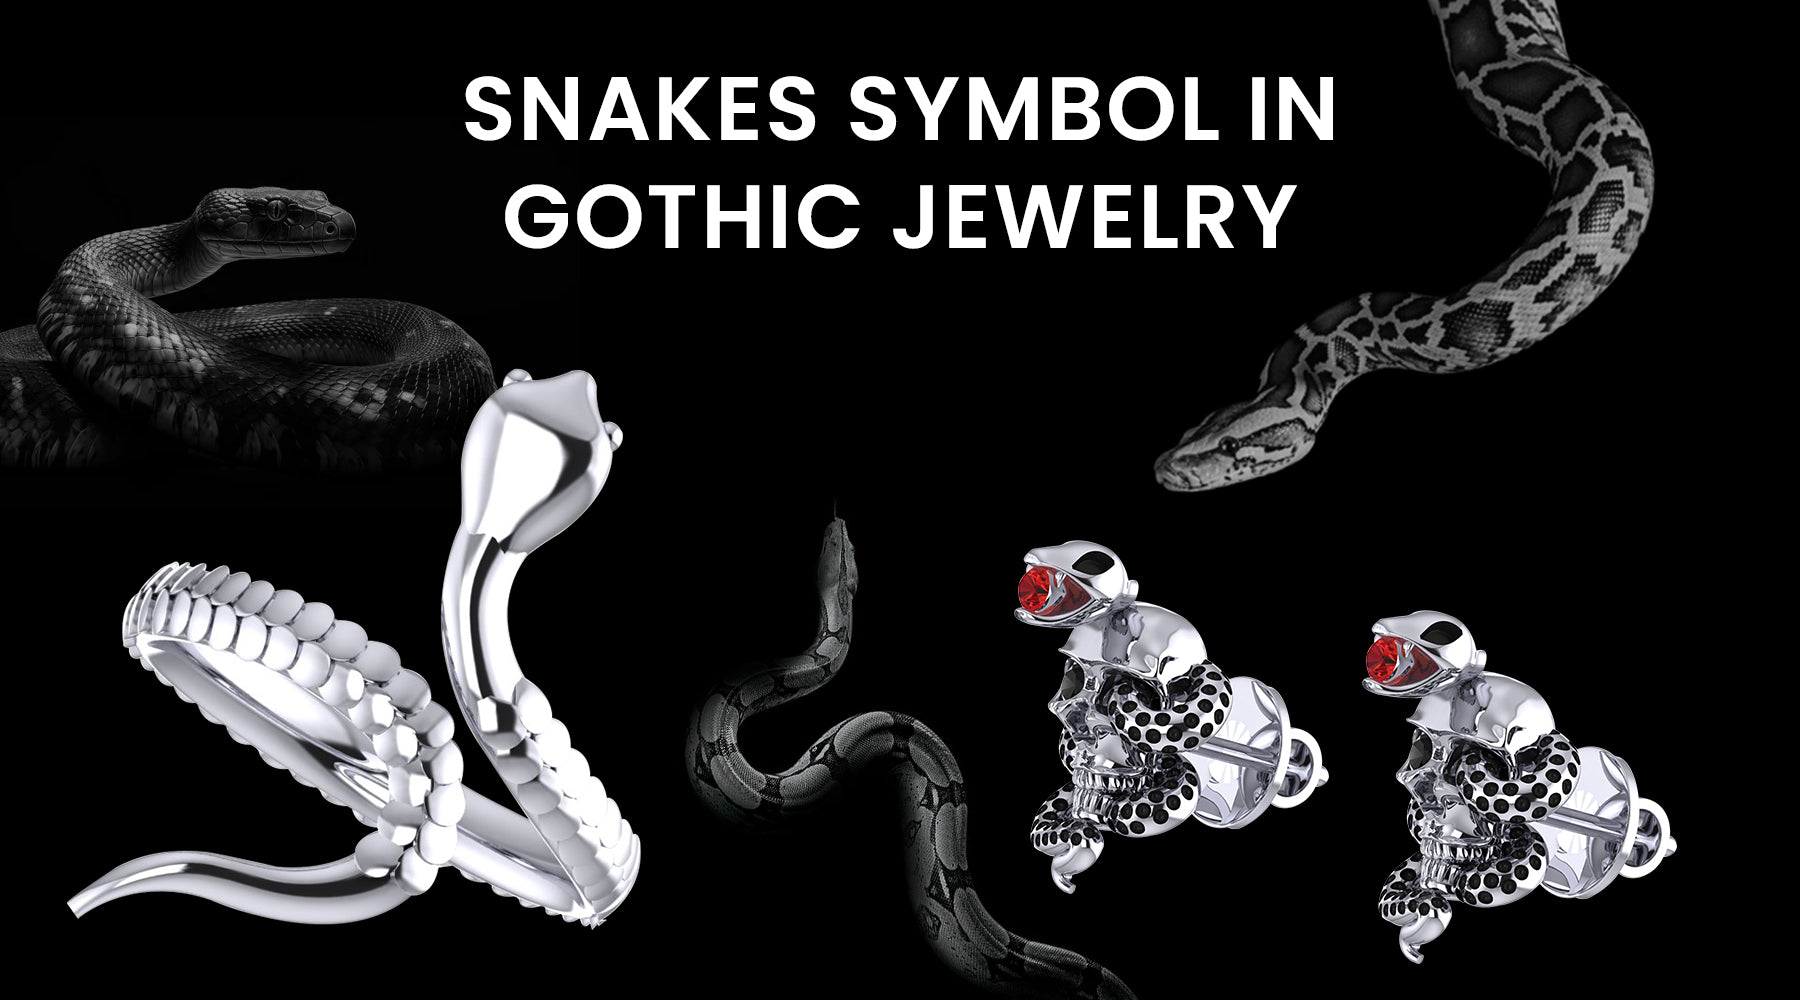 The Symbolism of Snakes in Gothic Jewelry